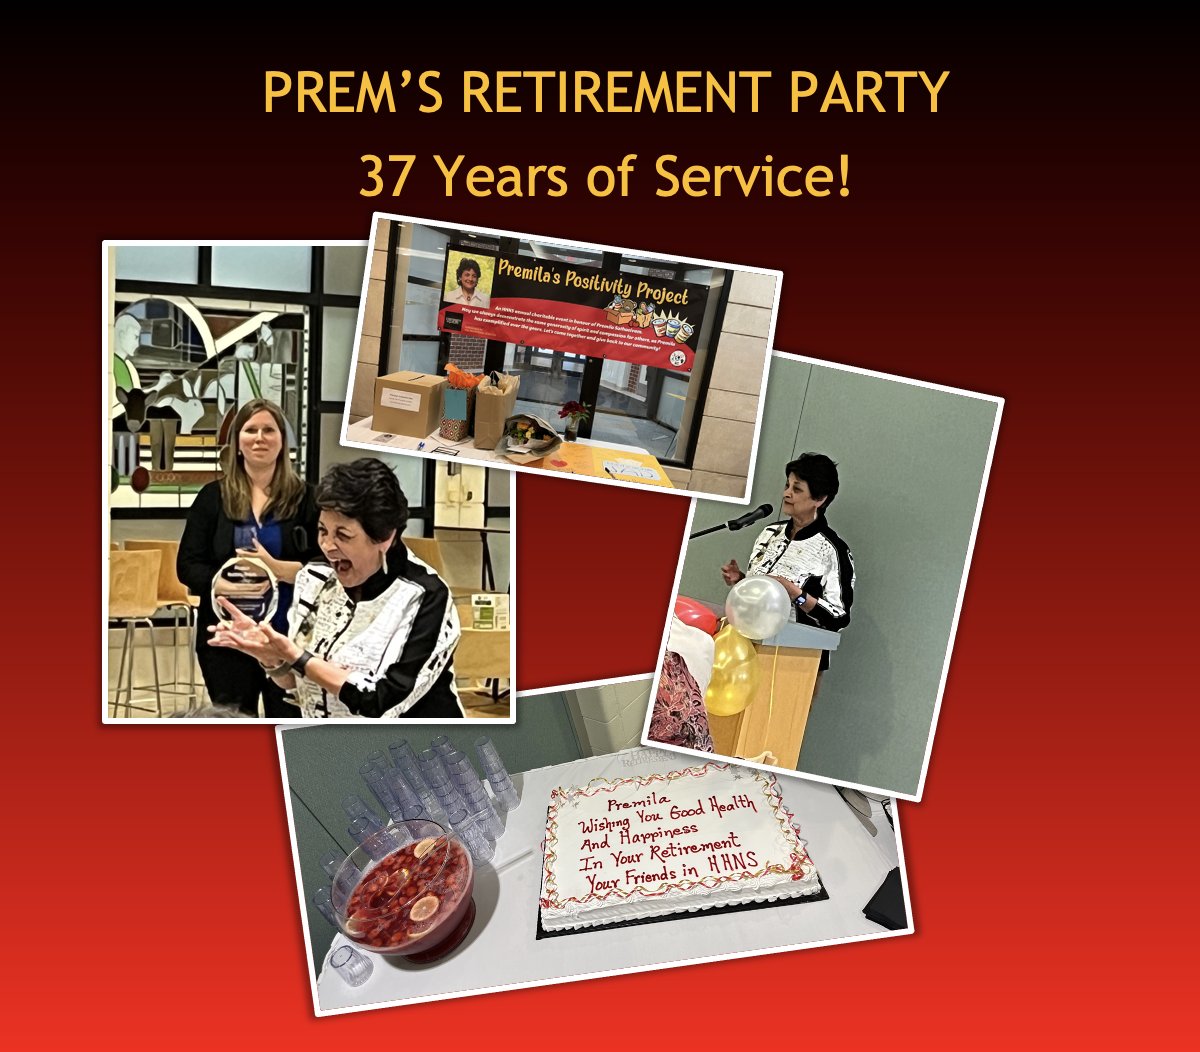 📢PREM'S RETIREMENT PARTY A SUCCESS!
🗓️37 Years of Service @UofG_HHNS!

🥼PREMILA SATHASIVAM
💼Manager, Human Anatomy Program - Retired

🏆Awards!
🎙️Speeches!
🍷Drinks!
🧀Hors d'Oeuvres! 

🐉#ForeverAGryphon
🔬#WomenInScience
🏛️#UofG #UofGCBS